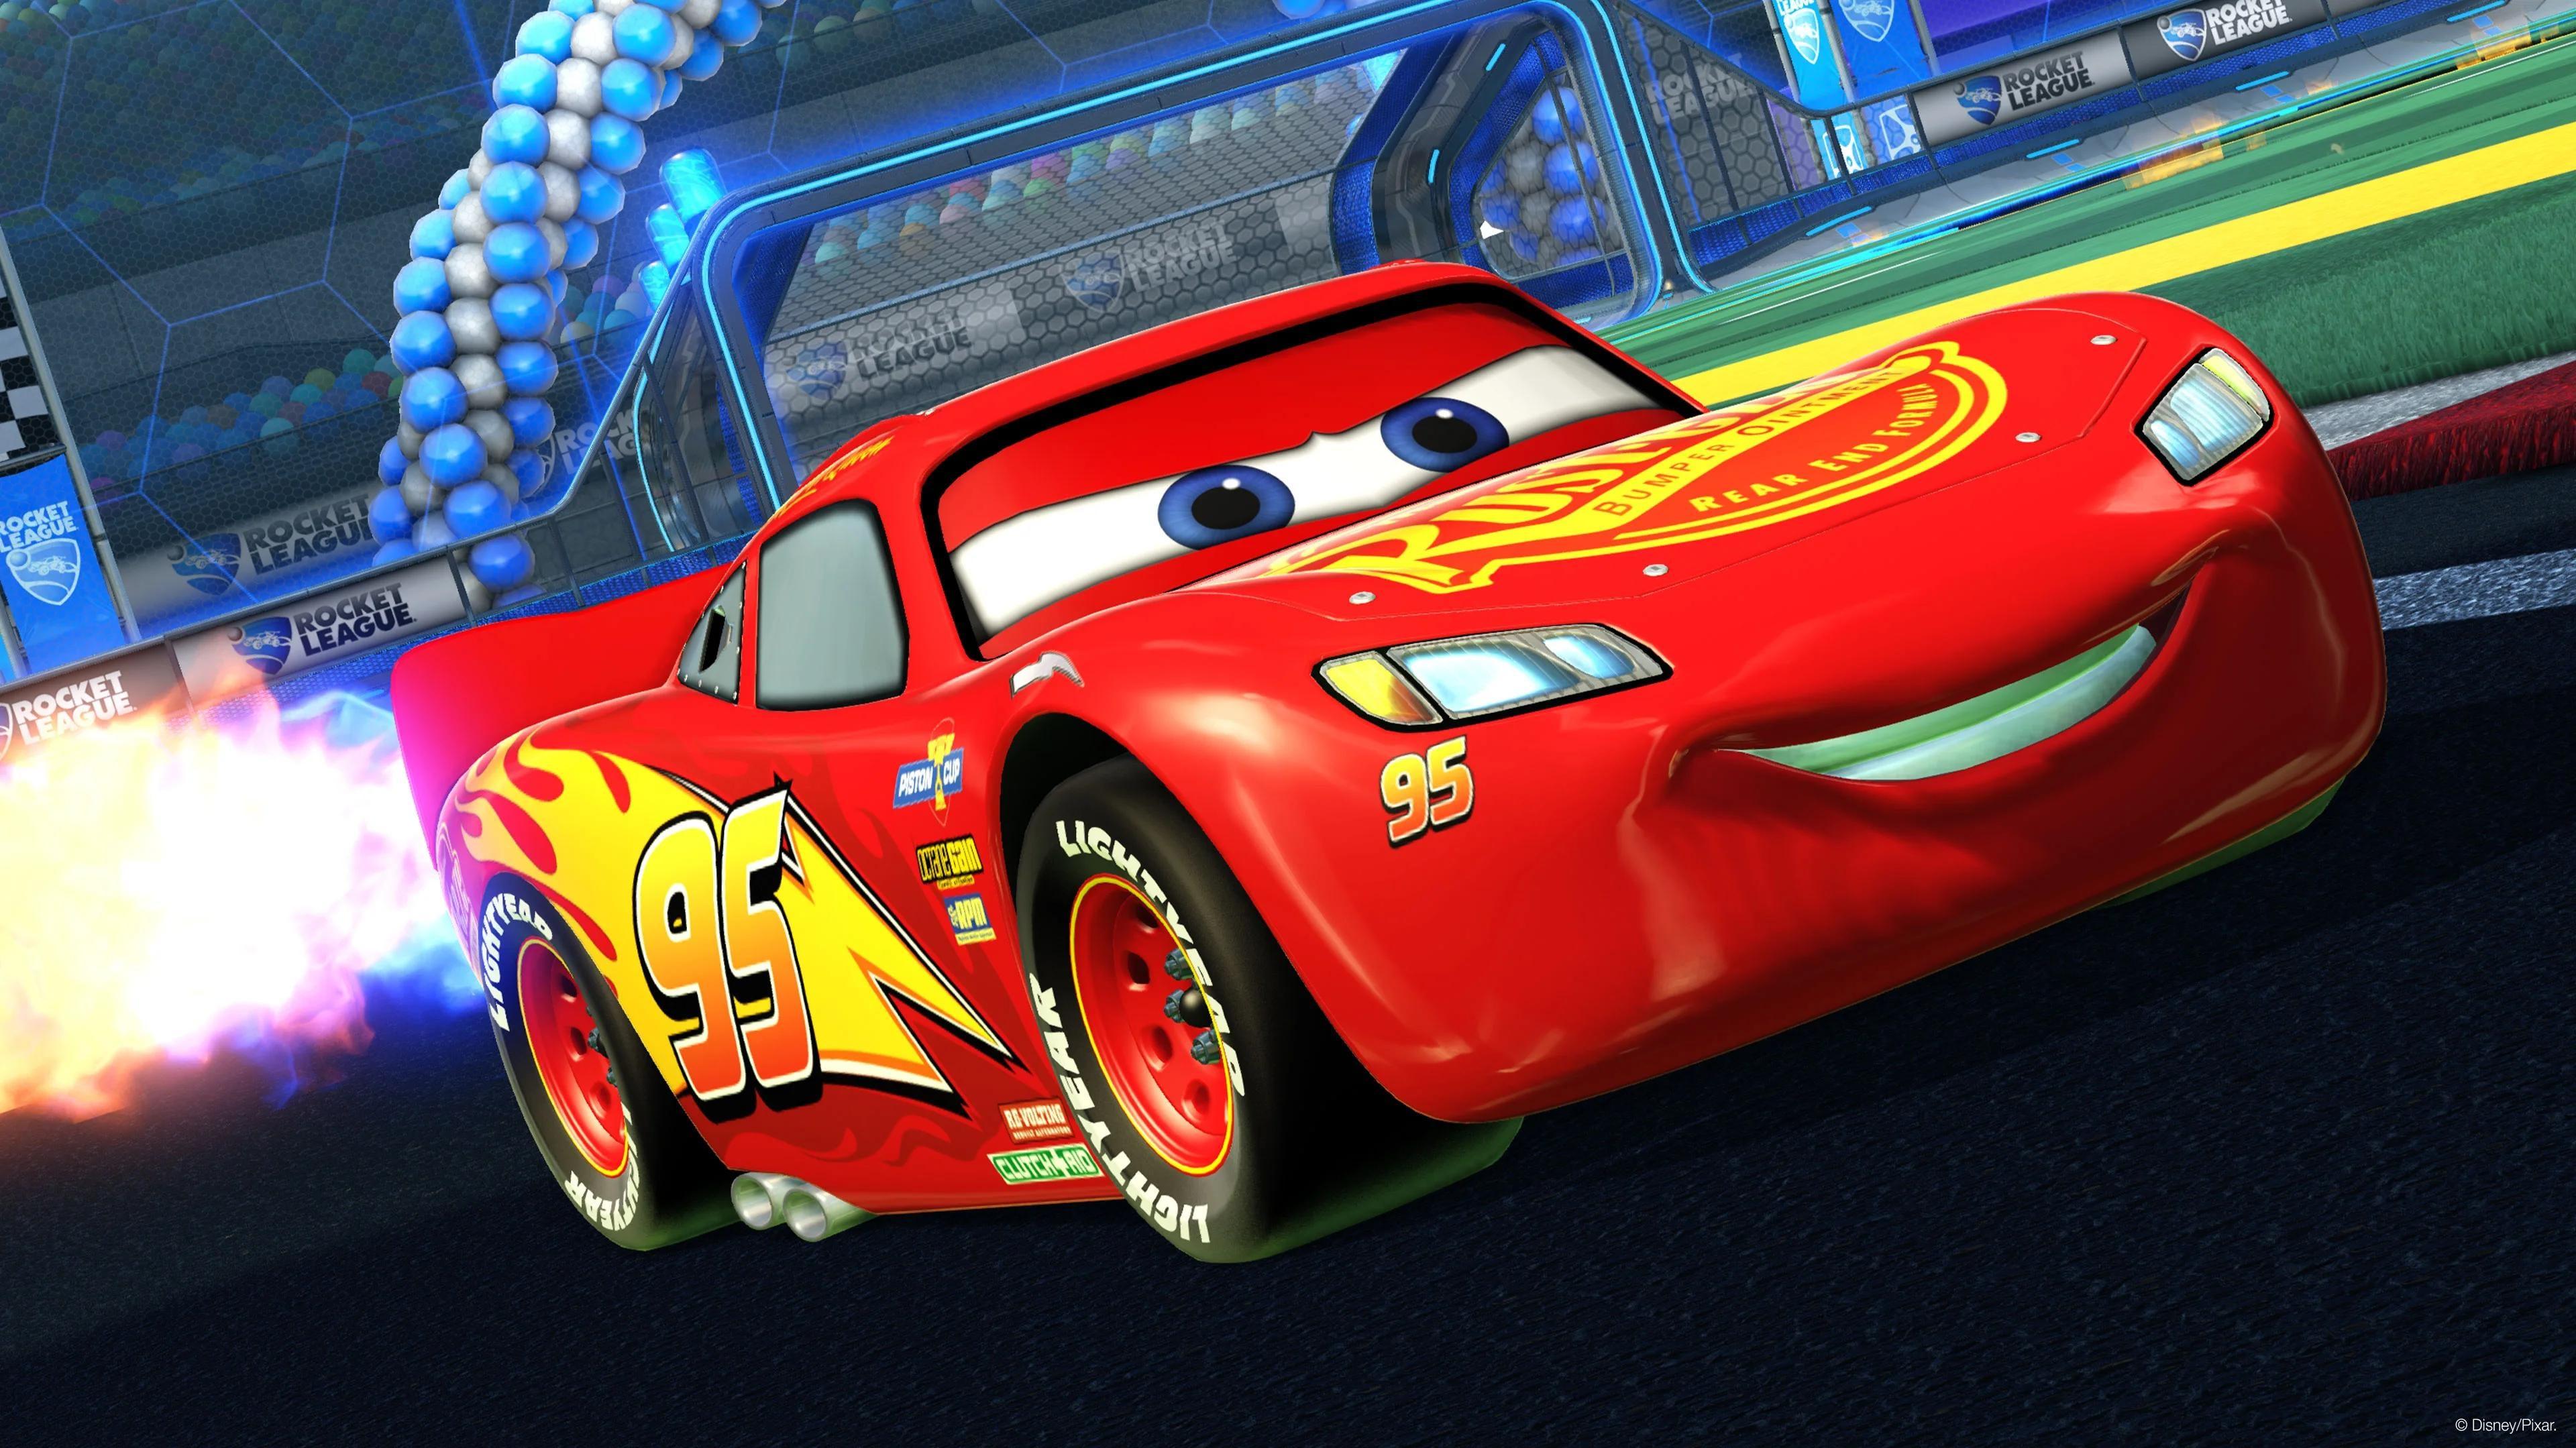 The Lightning Mcqueen Car Body And Other Cosmetics Hit Soccar